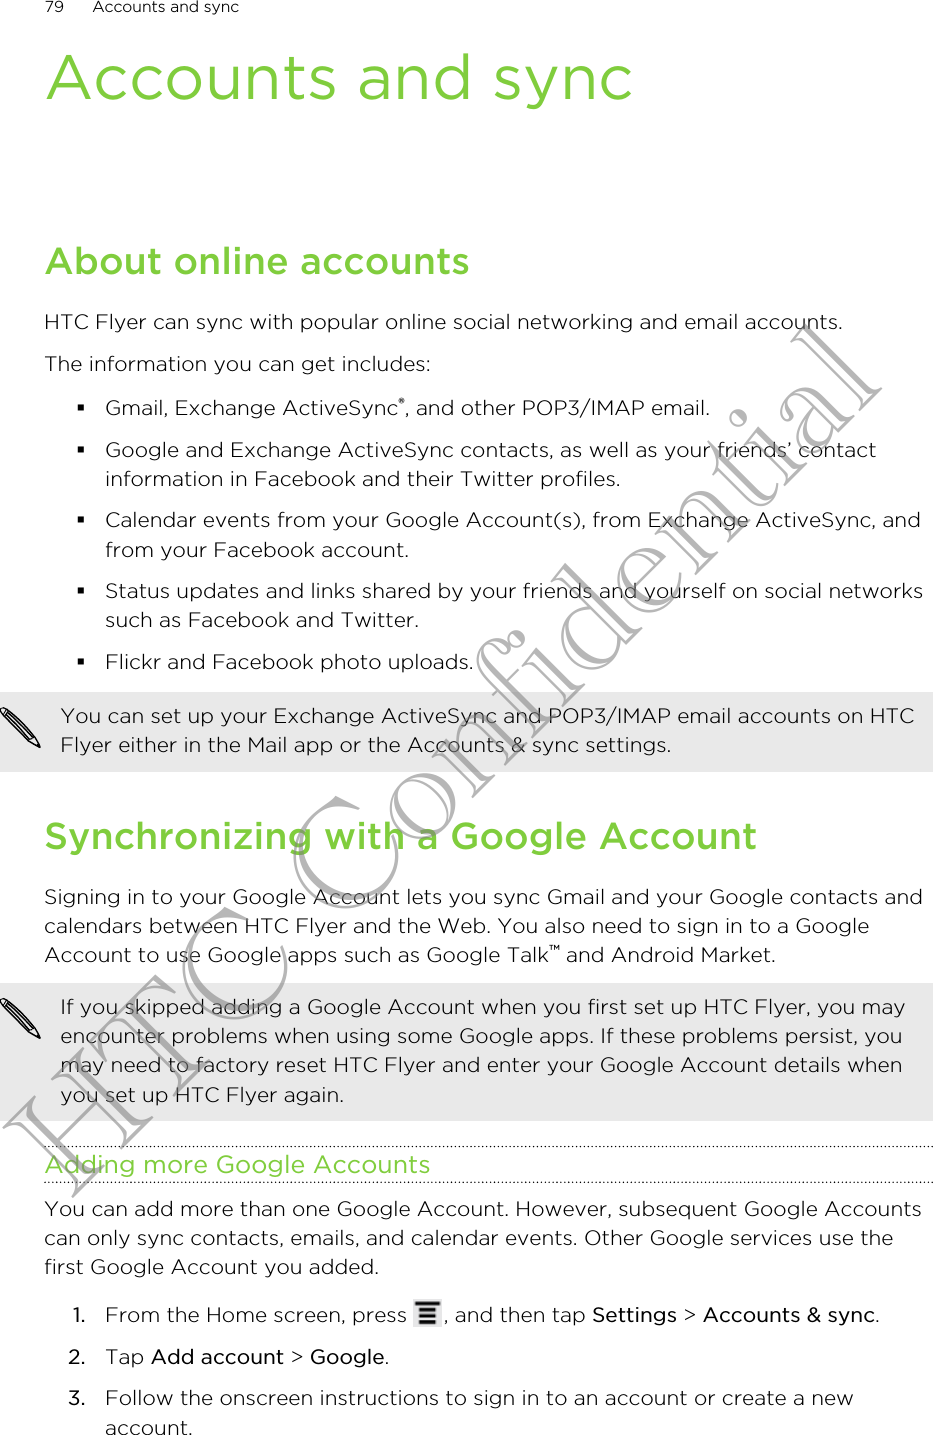 Accounts and syncAbout online accountsHTC Flyer can sync with popular online social networking and email accounts.The information you can get includes:§Gmail, Exchange ActiveSync®, and other POP3/IMAP email.§Google and Exchange ActiveSync contacts, as well as your friends’ contactinformation in Facebook and their Twitter profiles.§Calendar events from your Google Account(s), from Exchange ActiveSync, andfrom your Facebook account.§Status updates and links shared by your friends and yourself on social networkssuch as Facebook and Twitter.§Flickr and Facebook photo uploads.You can set up your Exchange ActiveSync and POP3/IMAP email accounts on HTCFlyer either in the Mail app or the Accounts &amp; sync settings.Synchronizing with a Google AccountSigning in to your Google Account lets you sync Gmail and your Google contacts andcalendars between HTC Flyer and the Web. You also need to sign in to a GoogleAccount to use Google apps such as Google Talk™ and Android Market.If you skipped adding a Google Account when you first set up HTC Flyer, you mayencounter problems when using some Google apps. If these problems persist, youmay need to factory reset HTC Flyer and enter your Google Account details whenyou set up HTC Flyer again.Adding more Google AccountsYou can add more than one Google Account. However, subsequent Google Accountscan only sync contacts, emails, and calendar events. Other Google services use thefirst Google Account you added.1. From the Home screen, press  , and then tap Settings &gt; Accounts &amp; sync.2. Tap Add account &gt; Google.3. Follow the onscreen instructions to sign in to an account or create a newaccount.79 Accounts and syncHTC Confidential